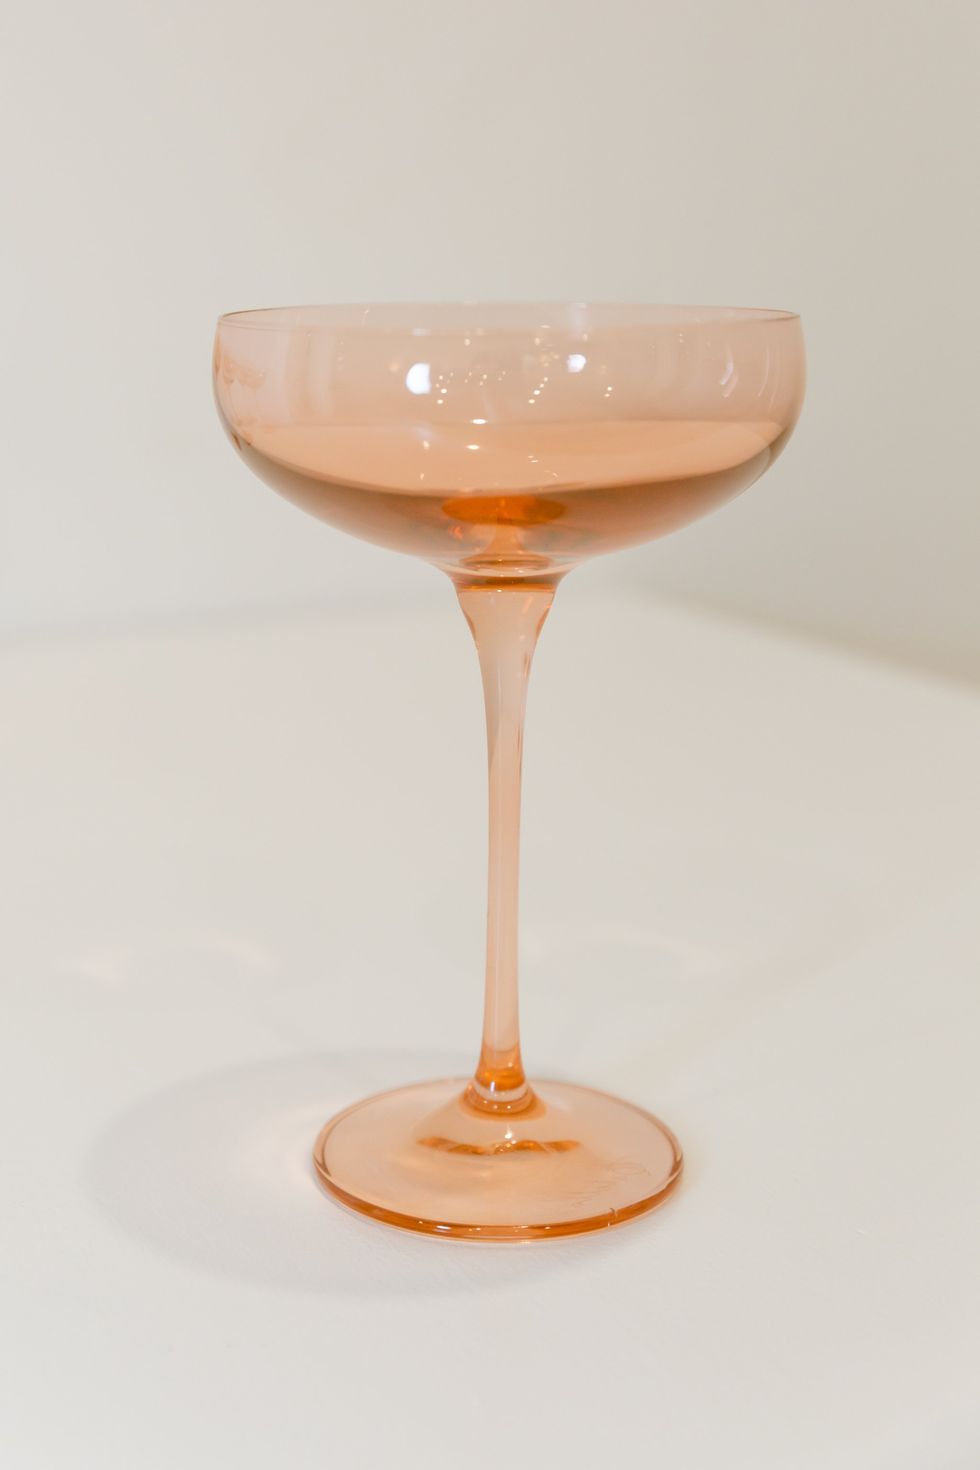 Estelle Colored Glass Hand-Blown Colored Cocktail Coupe Glasses on Food52